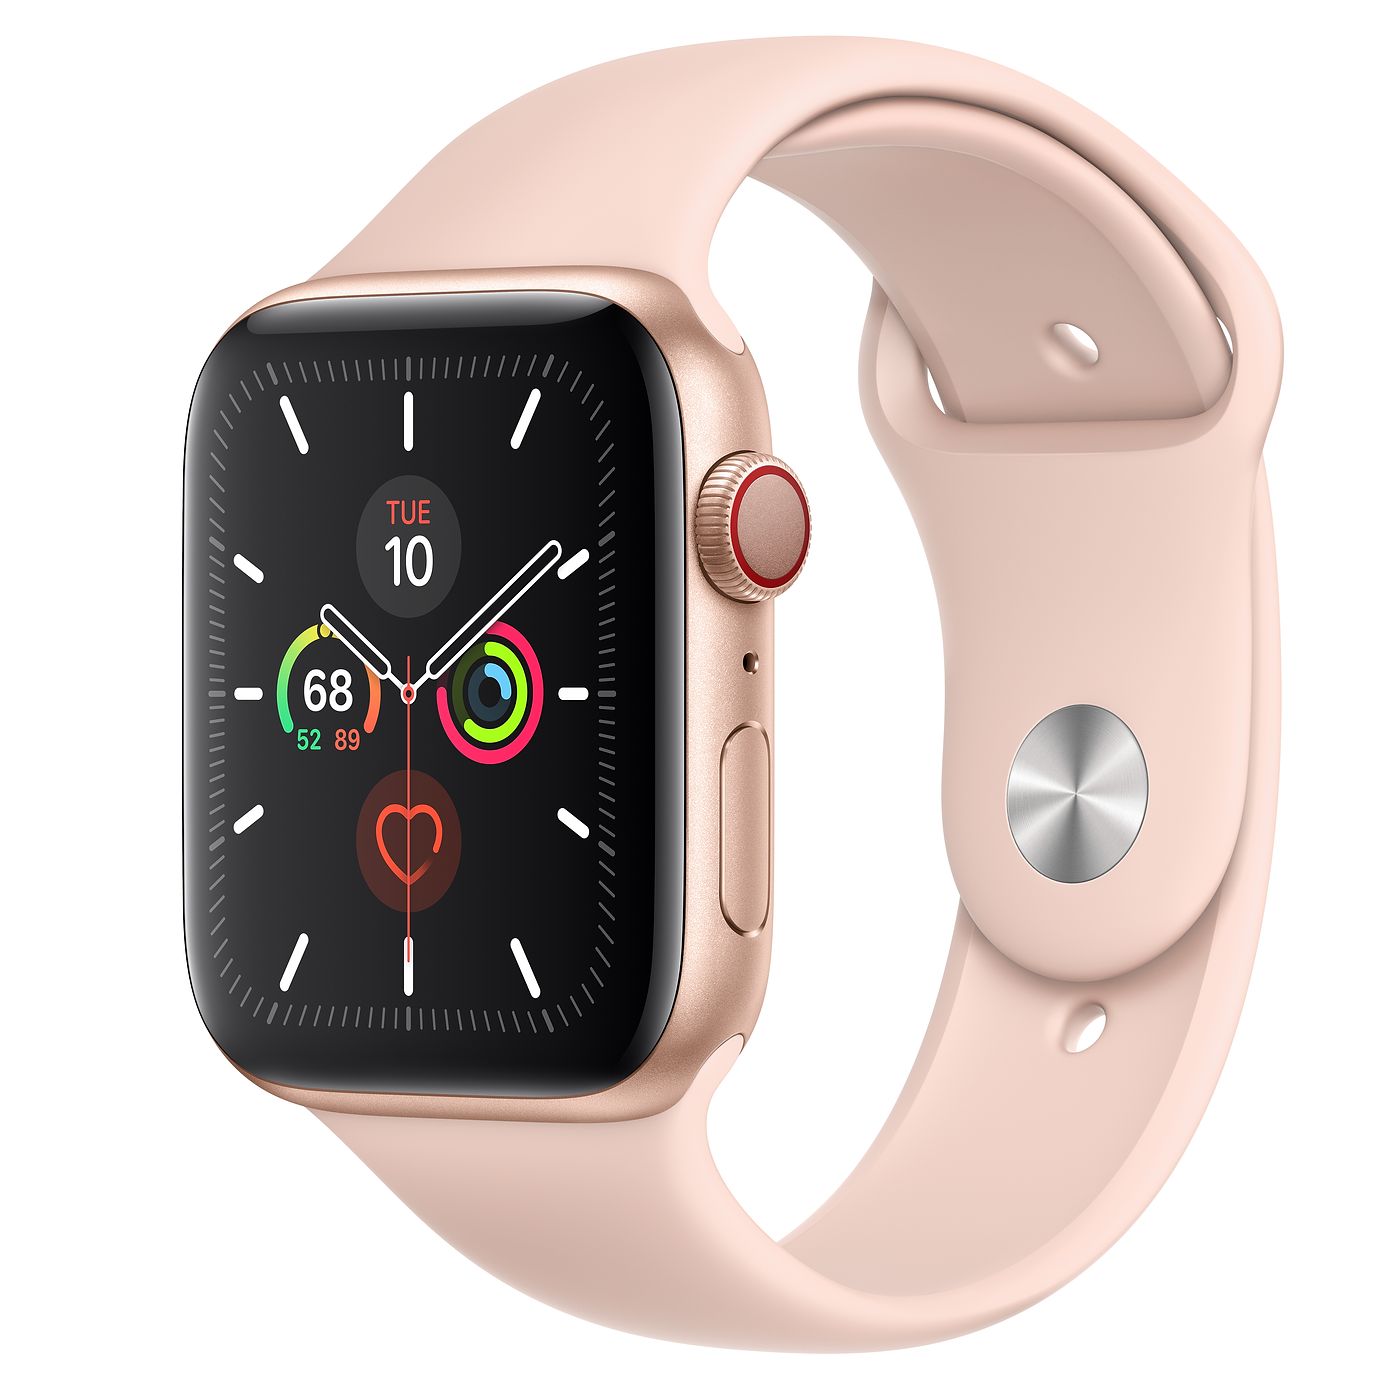 Apple Watch Series 5 44mm Cellularその他